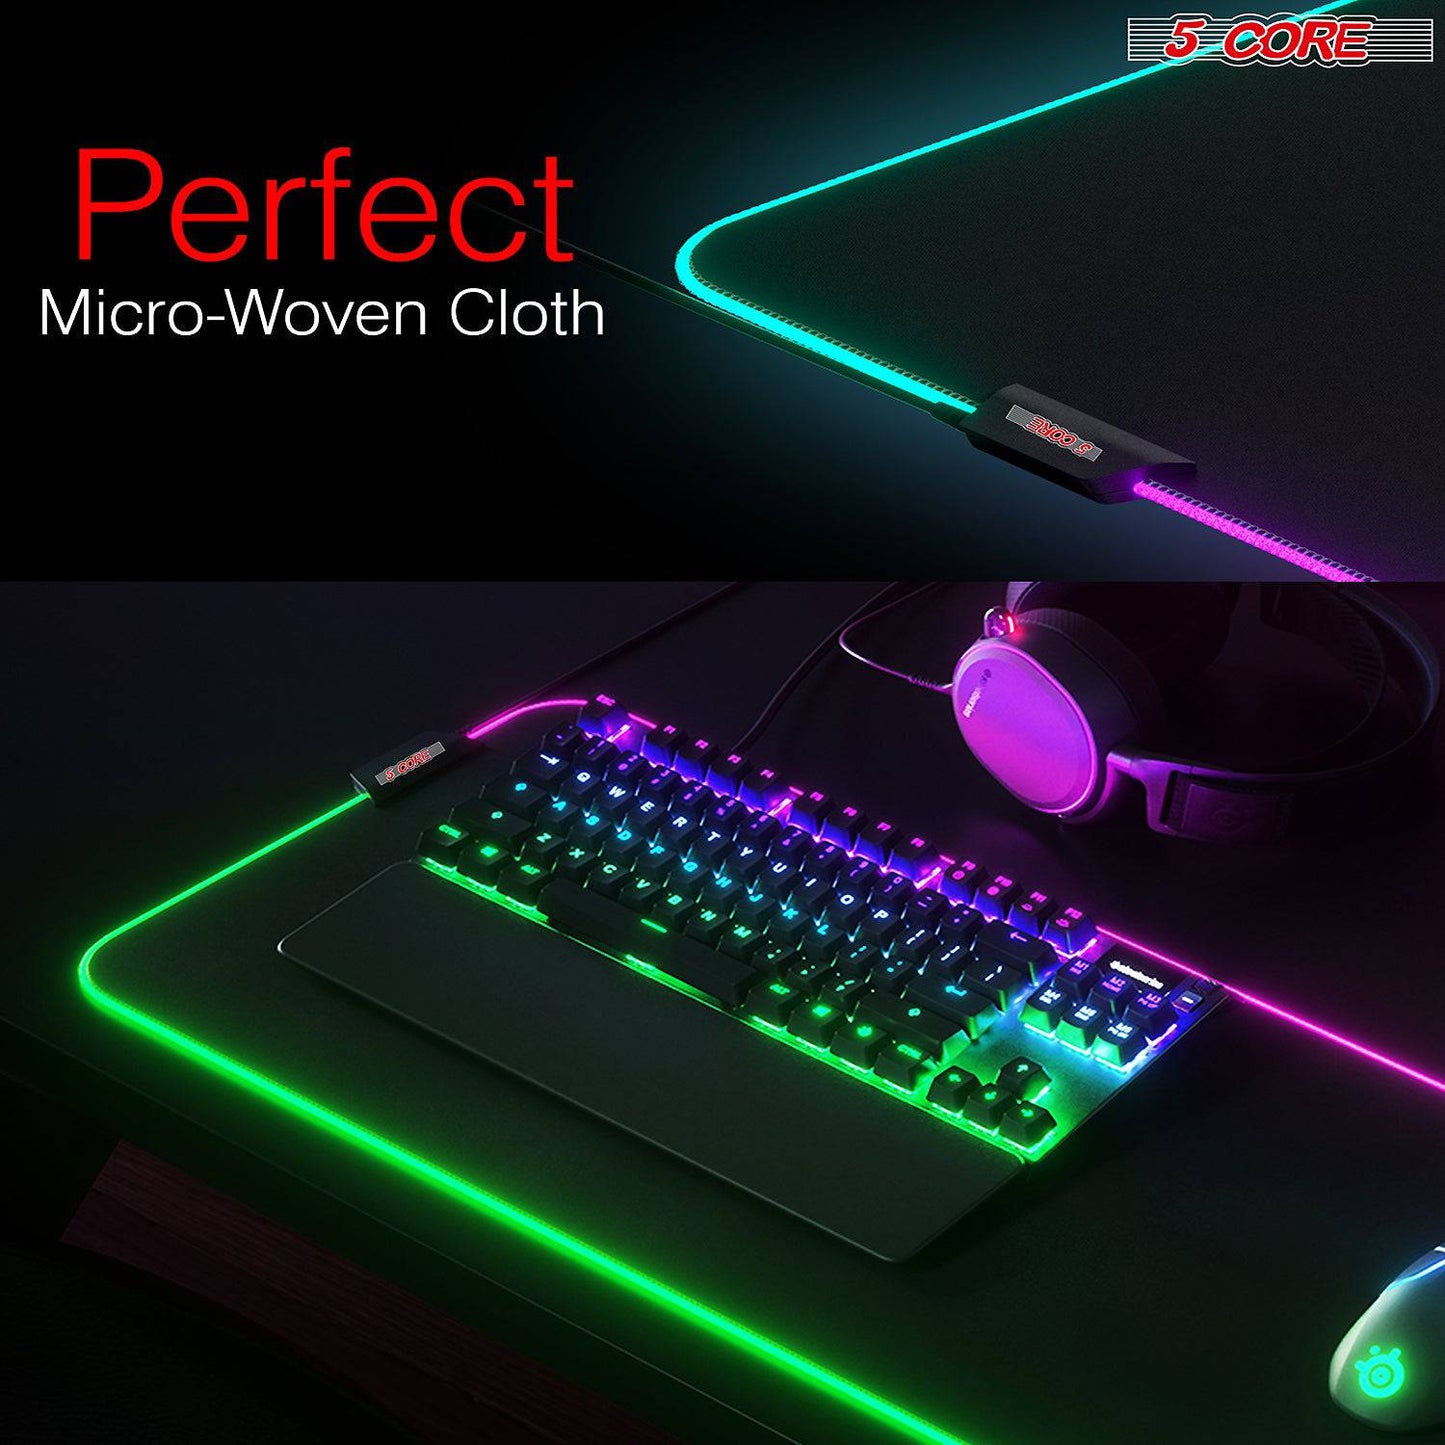 5Core LARGE RGB LED Extra Large Soft Gaming Mouse Pad Extended Oversized MP 300 RGB